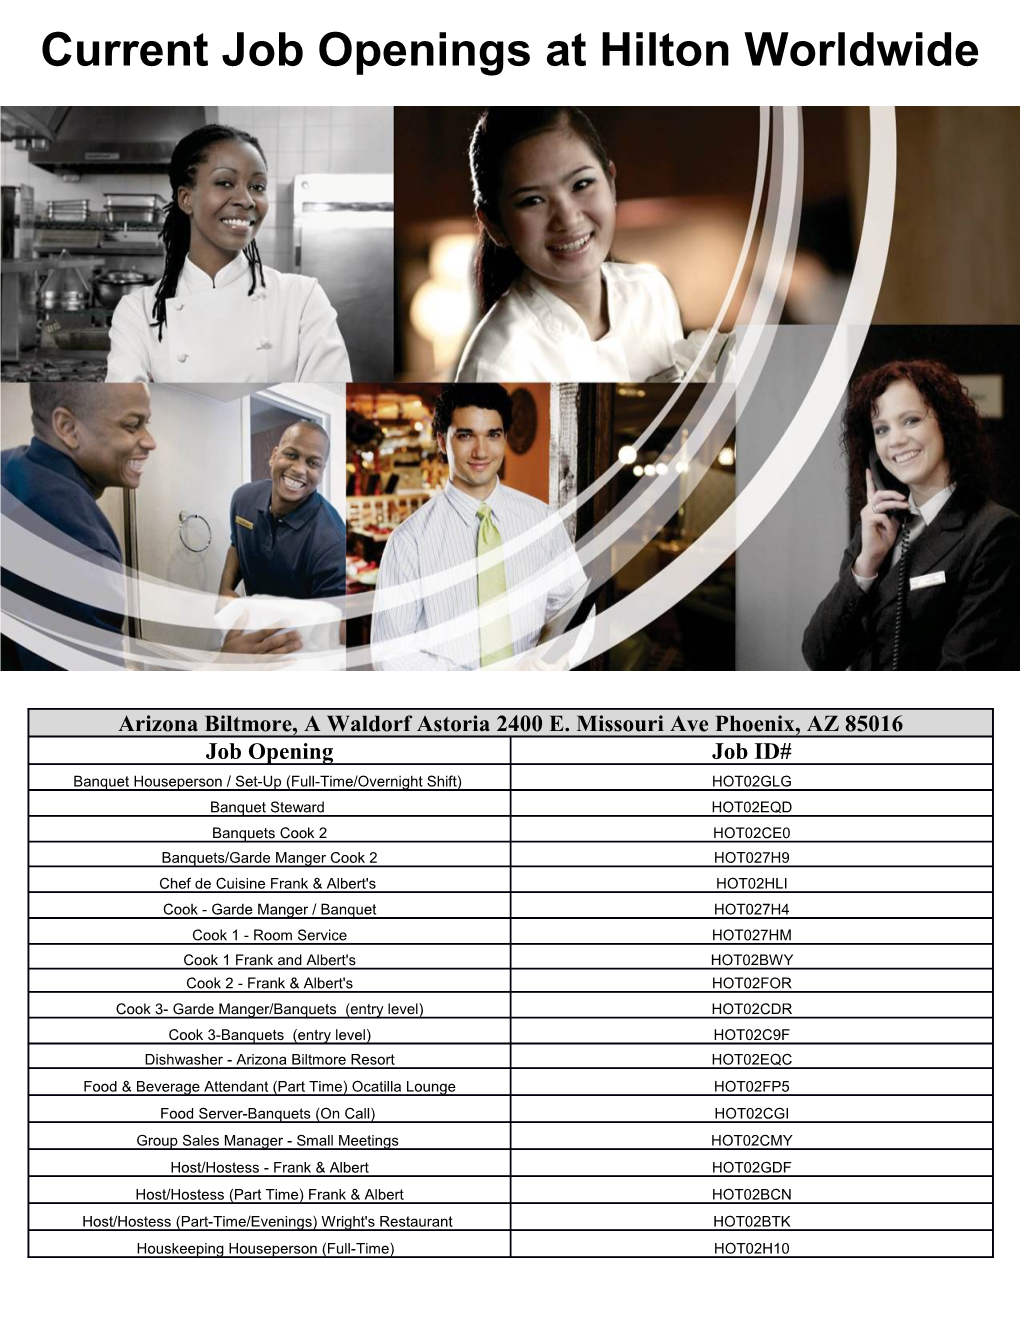 Current Job Openings at Hilton Worldwide